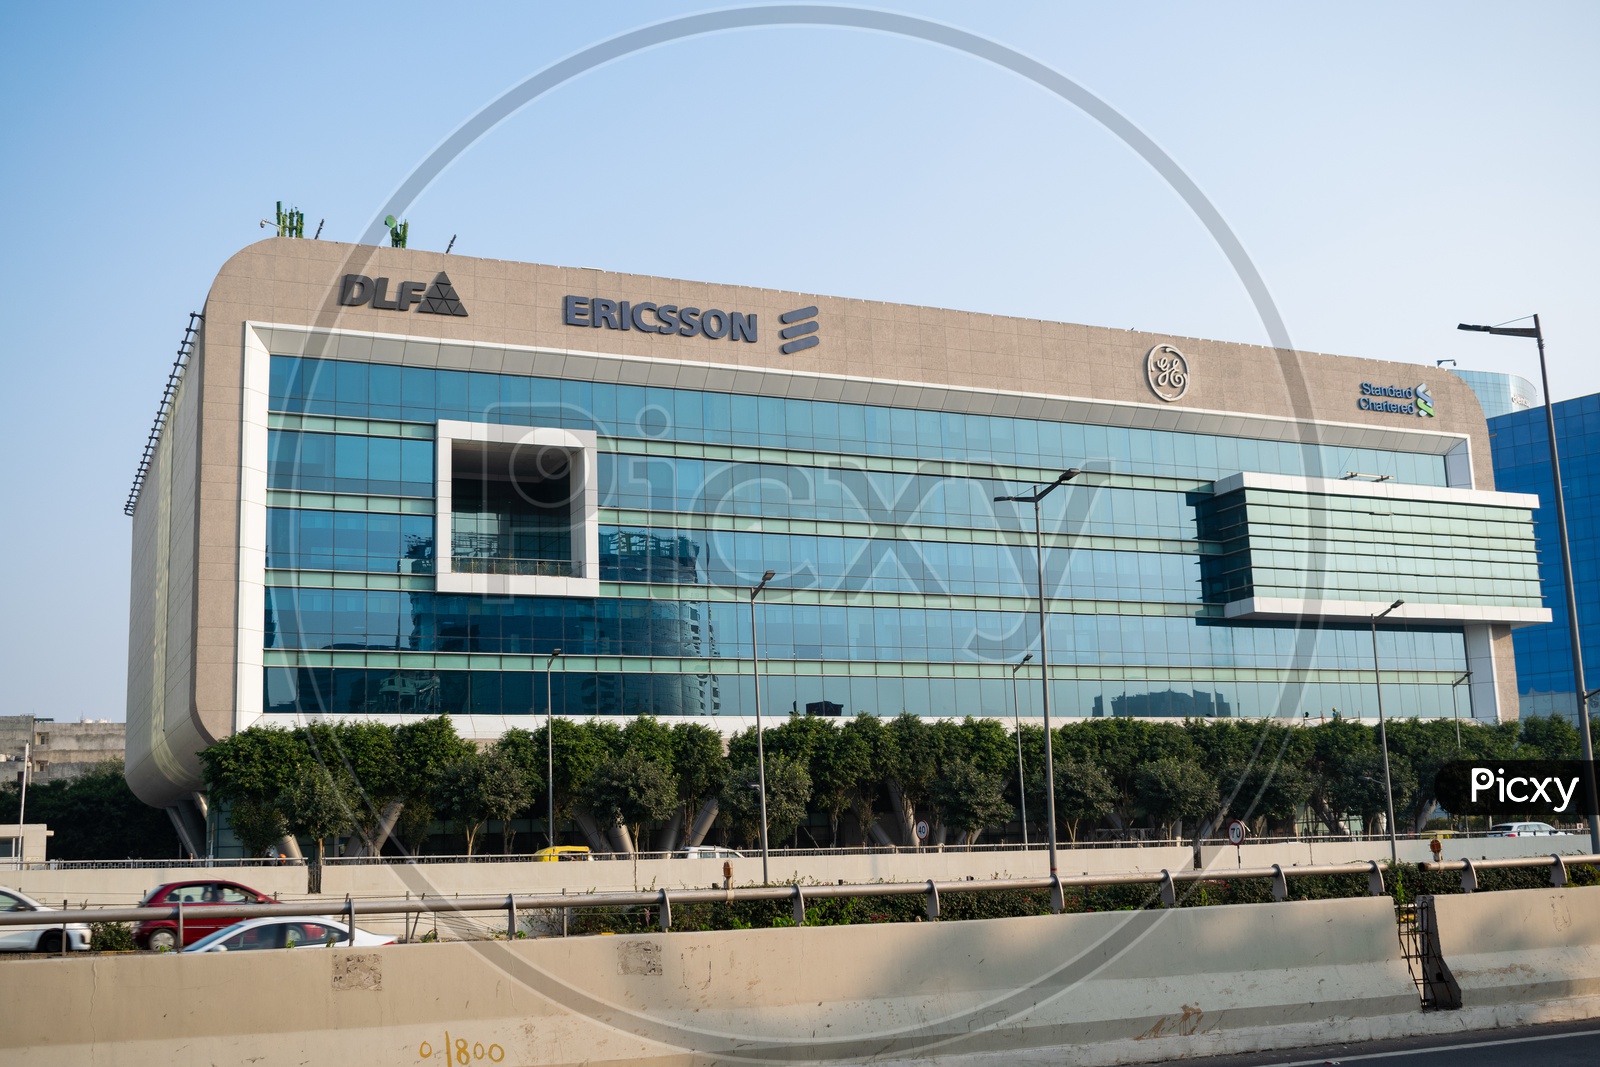 Ericsson, General Electric and standard chartered bank branch in a building at DLF Cyber city